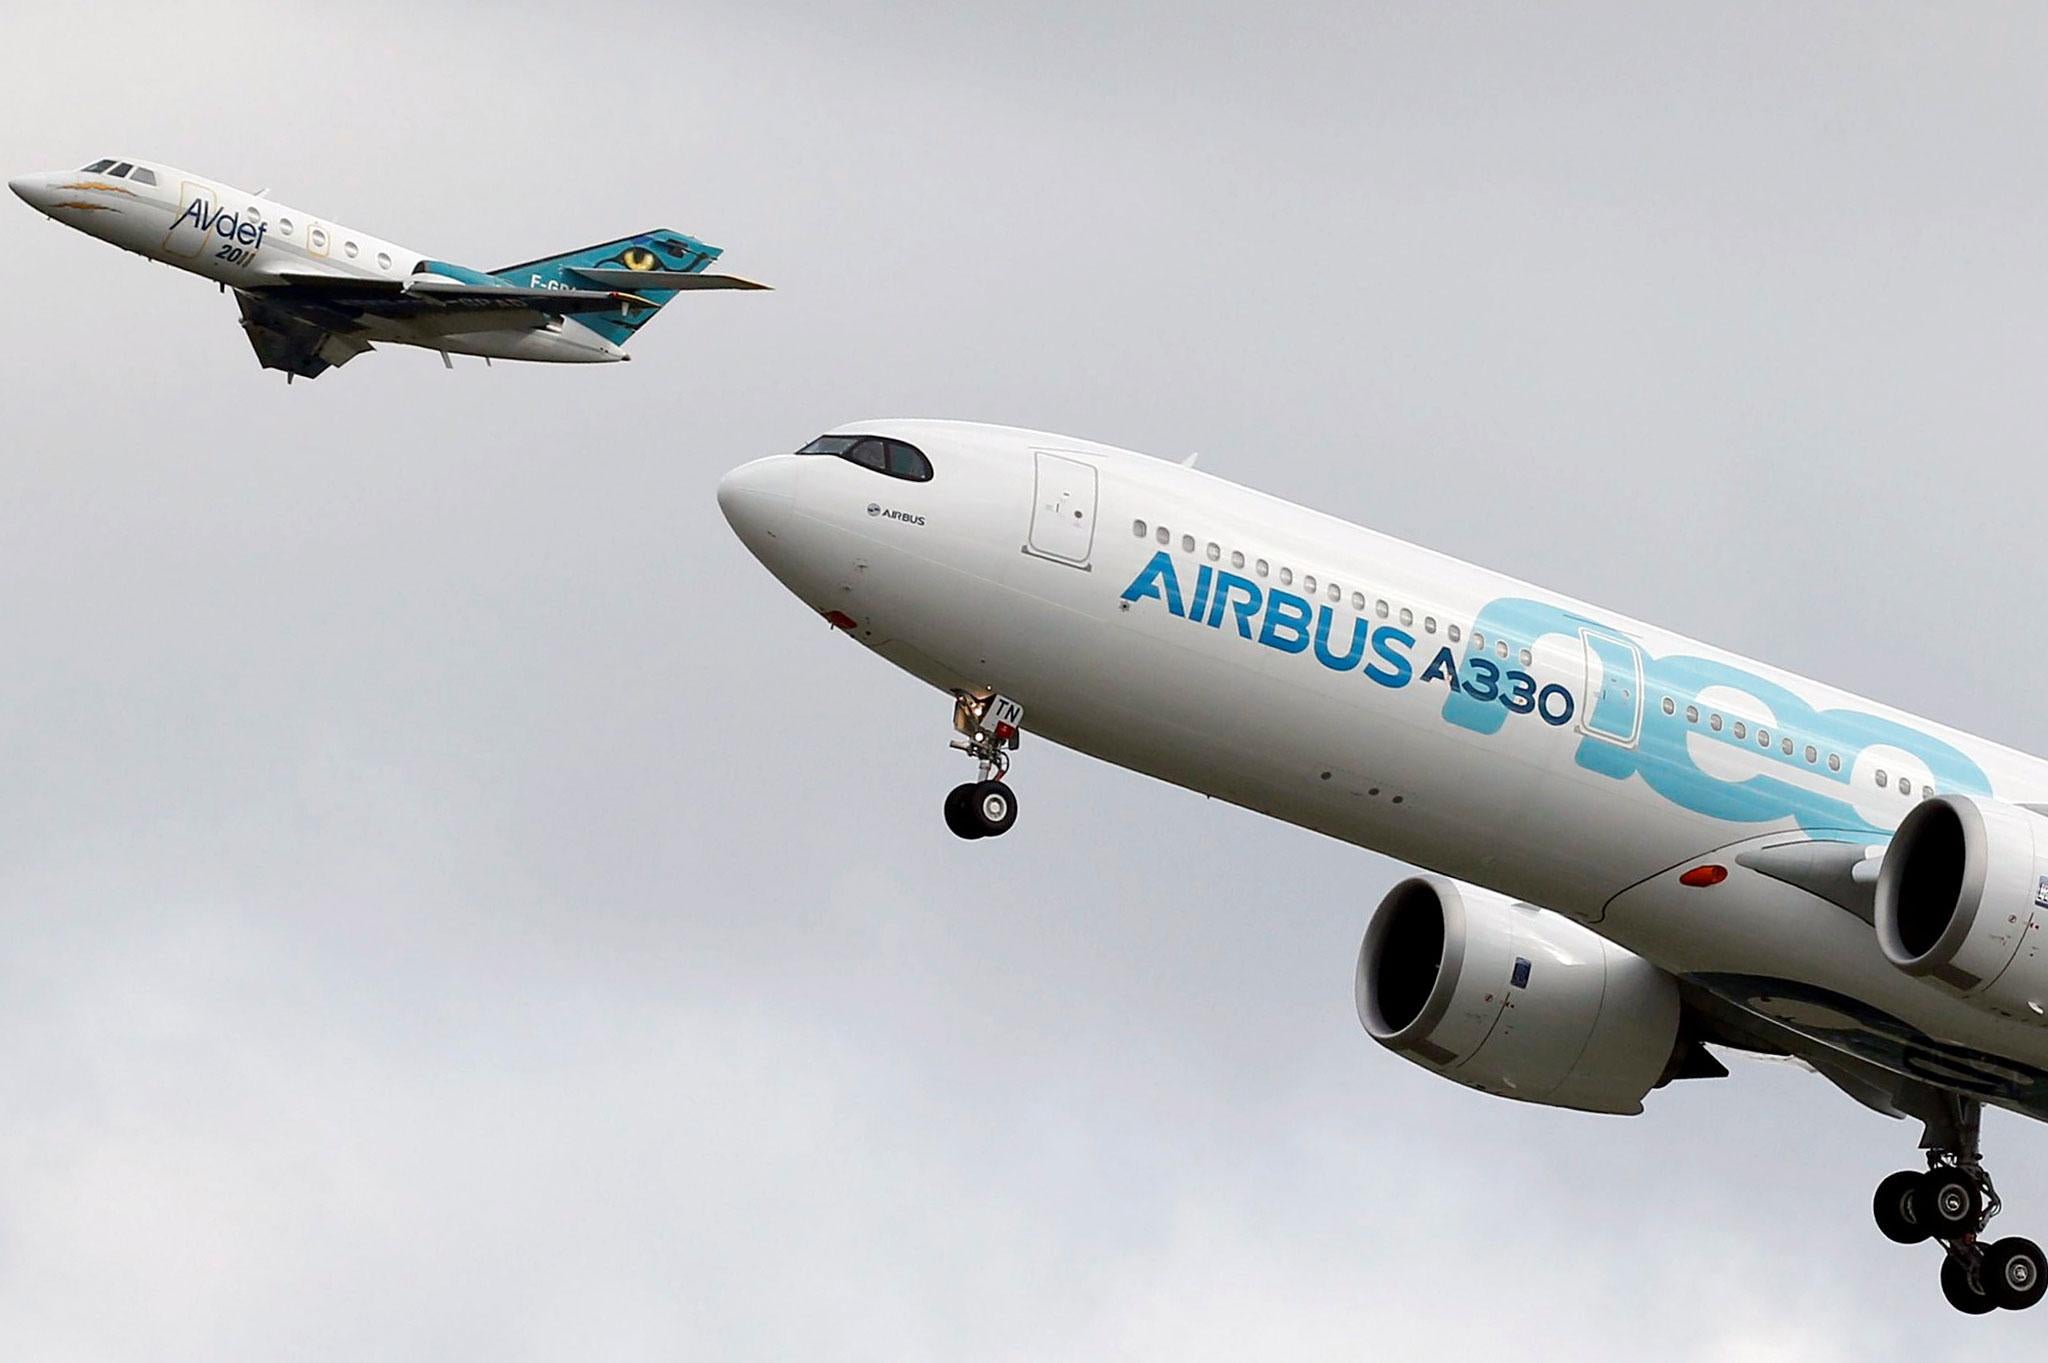 Airbus has been badly shaken by the existing corruption probes, which have already clipped aircraft sales